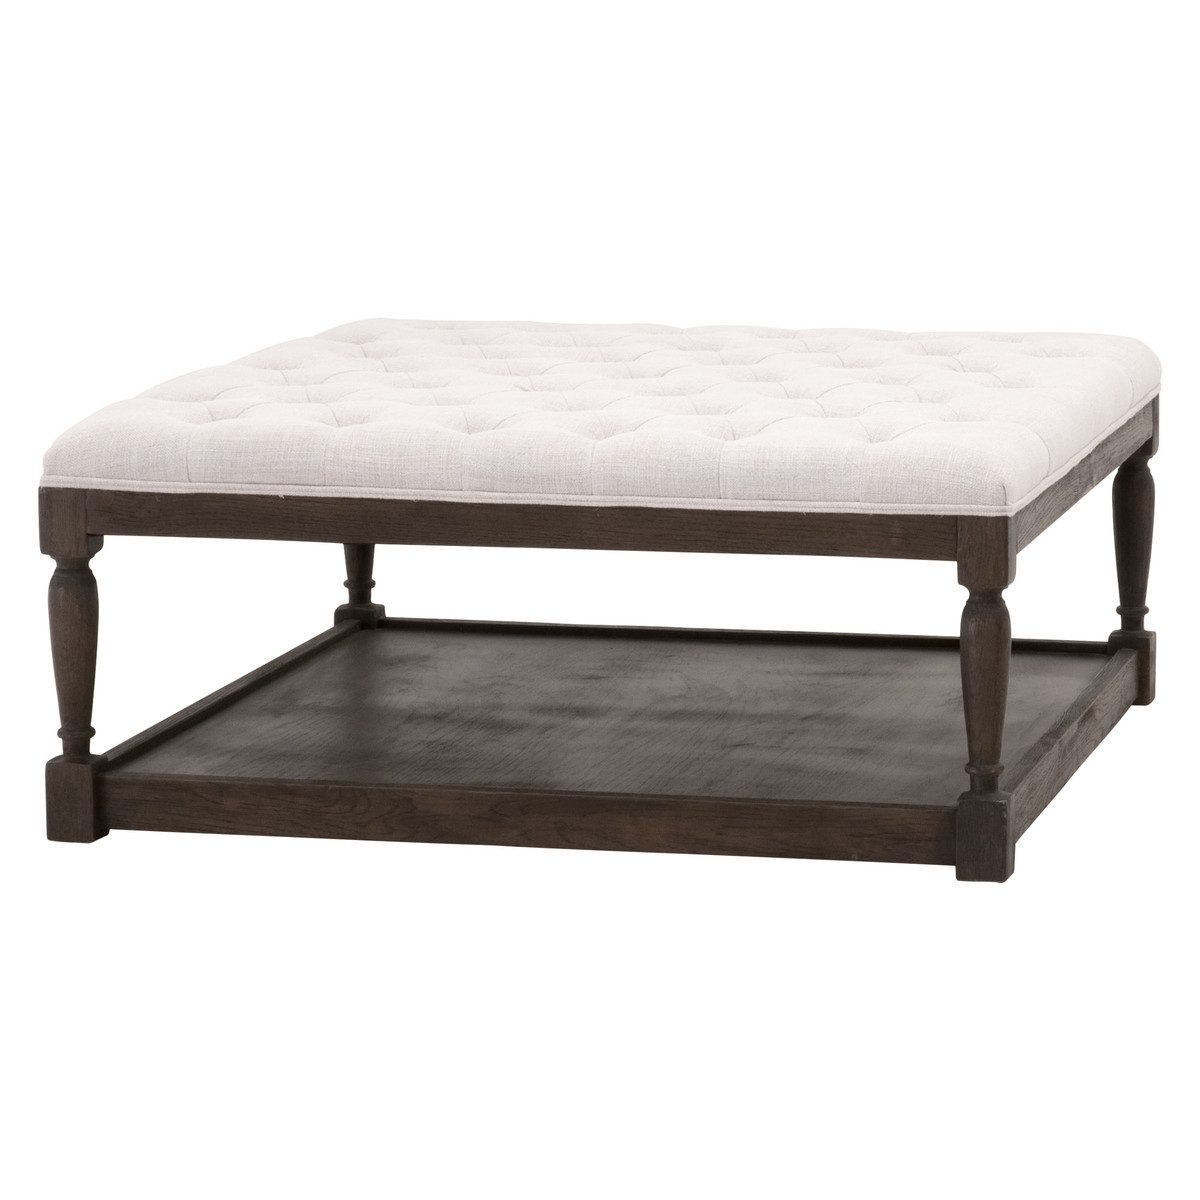 Cambridge Square Upholstered Coffee Table - Image 1